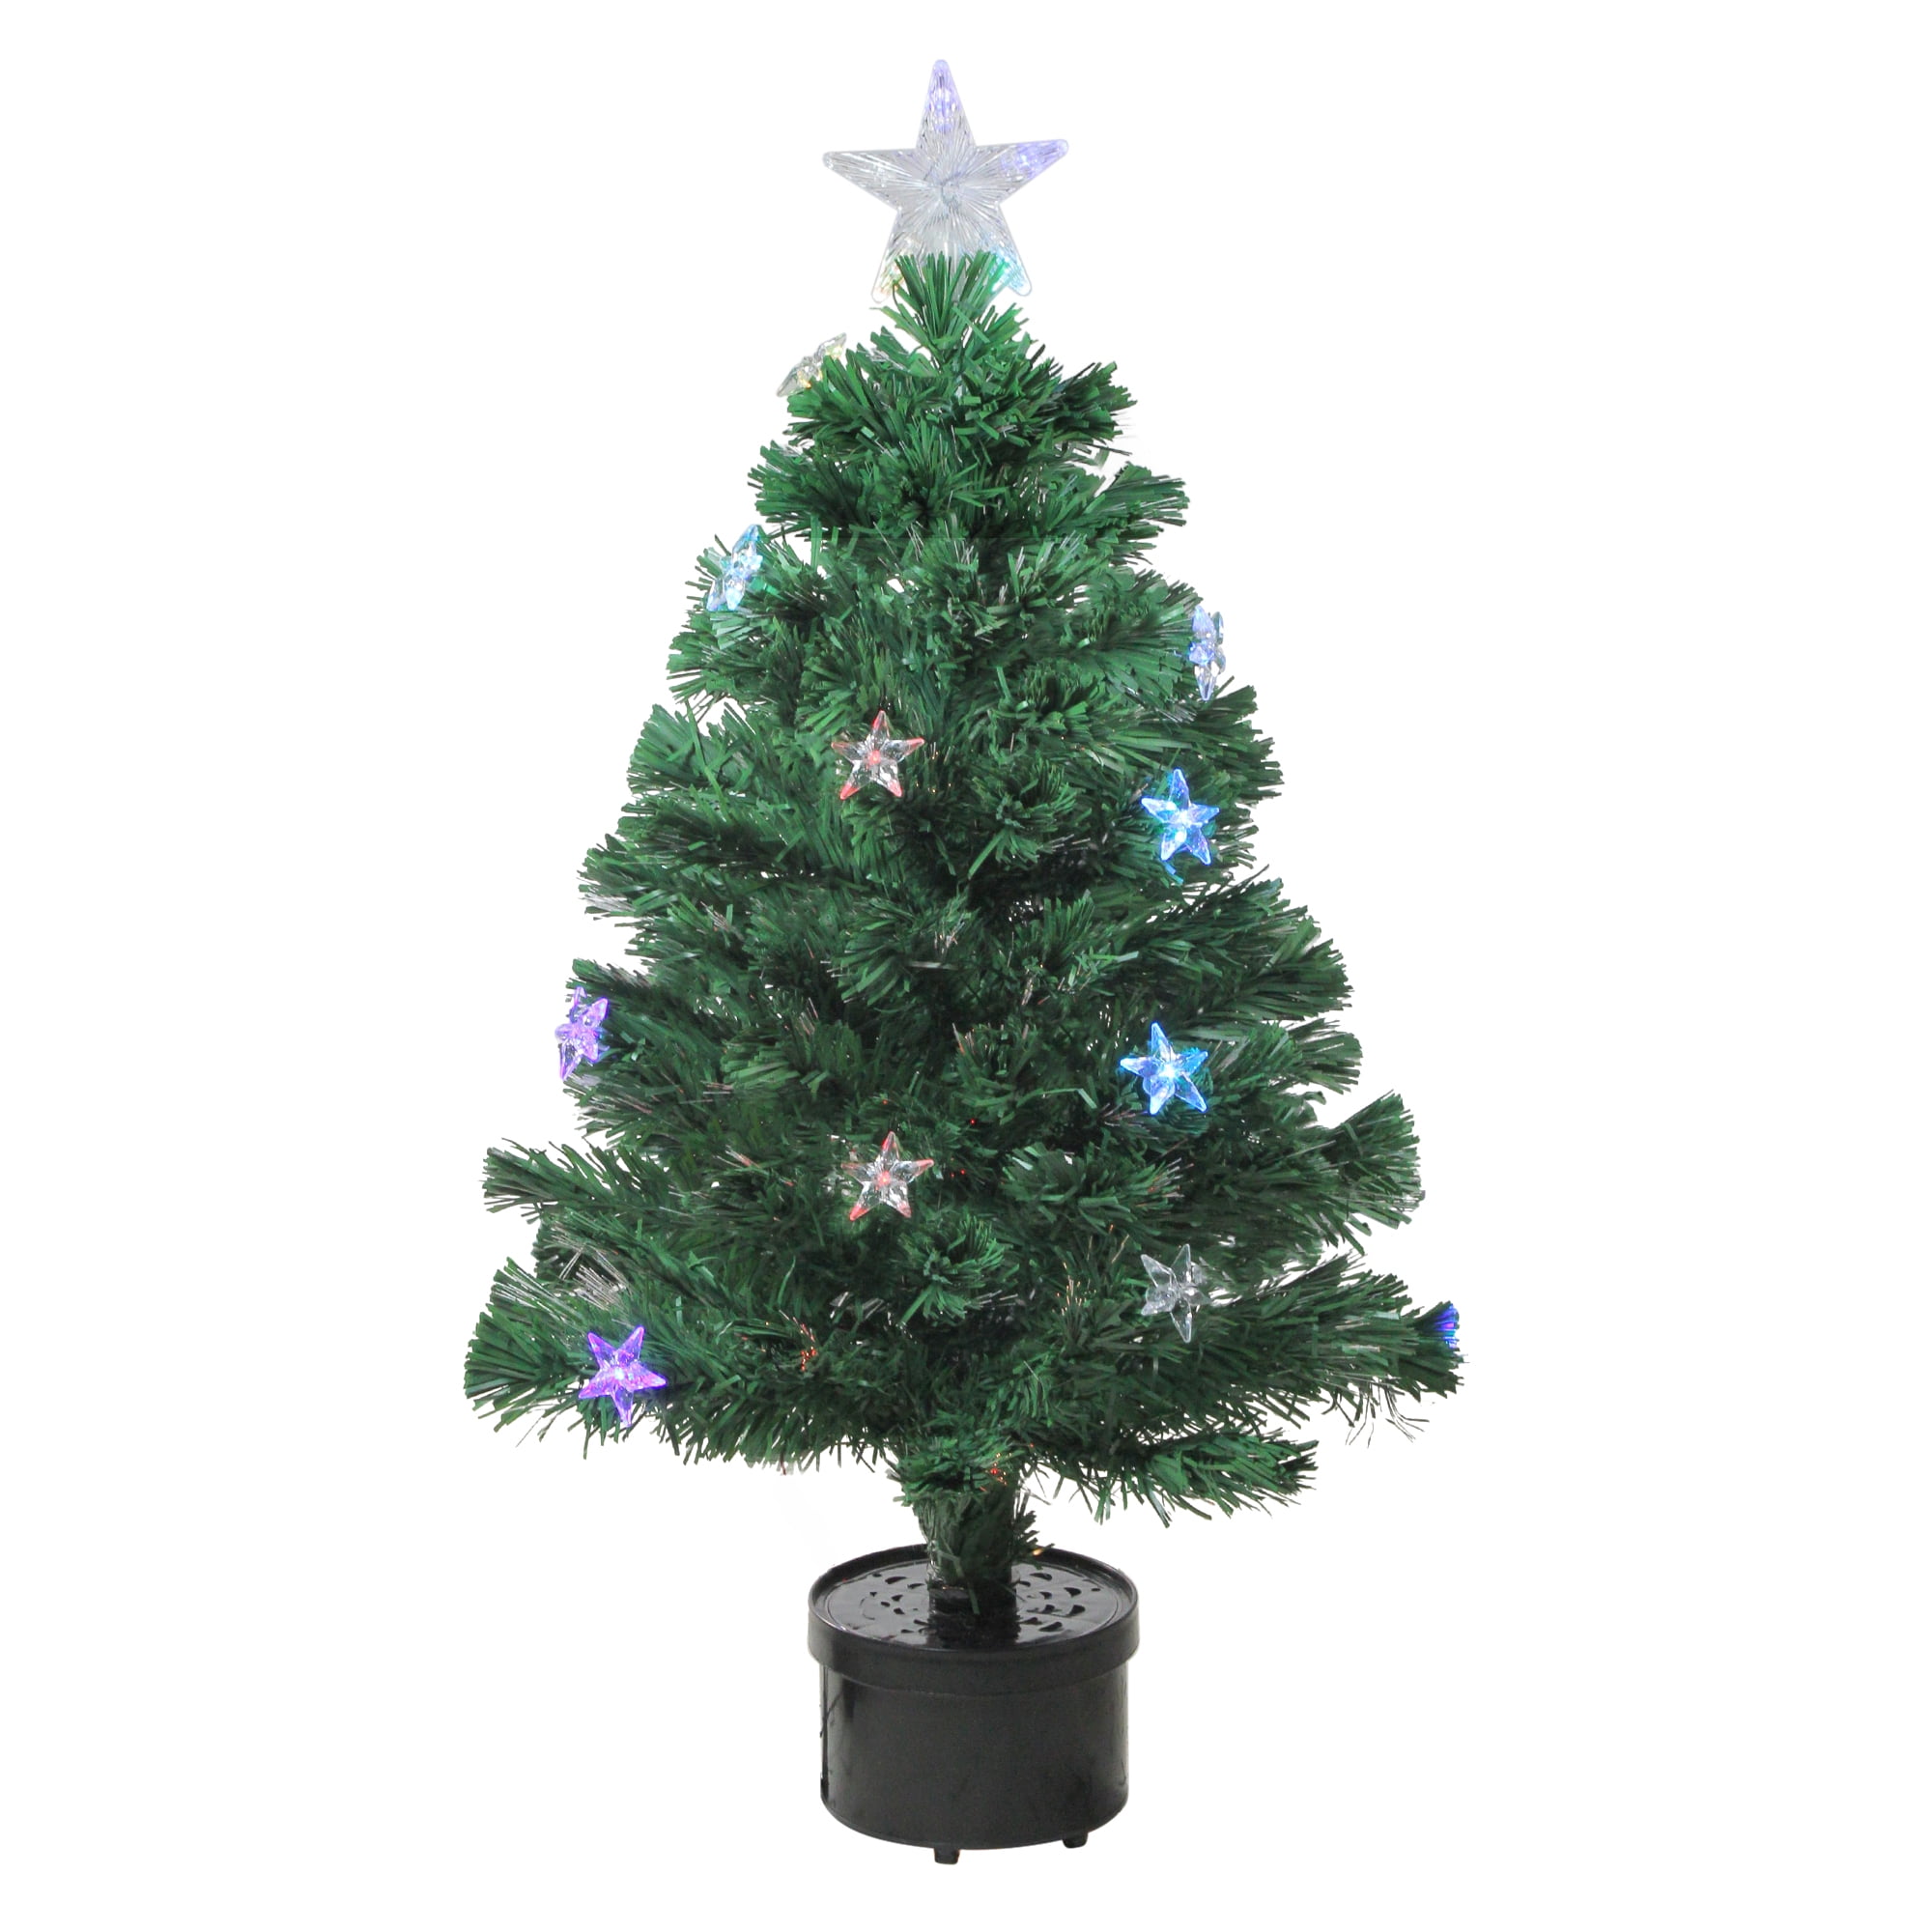 Christmas Tree Green Fibre Optic Led Multicolor Changing Lights Battery Operated 